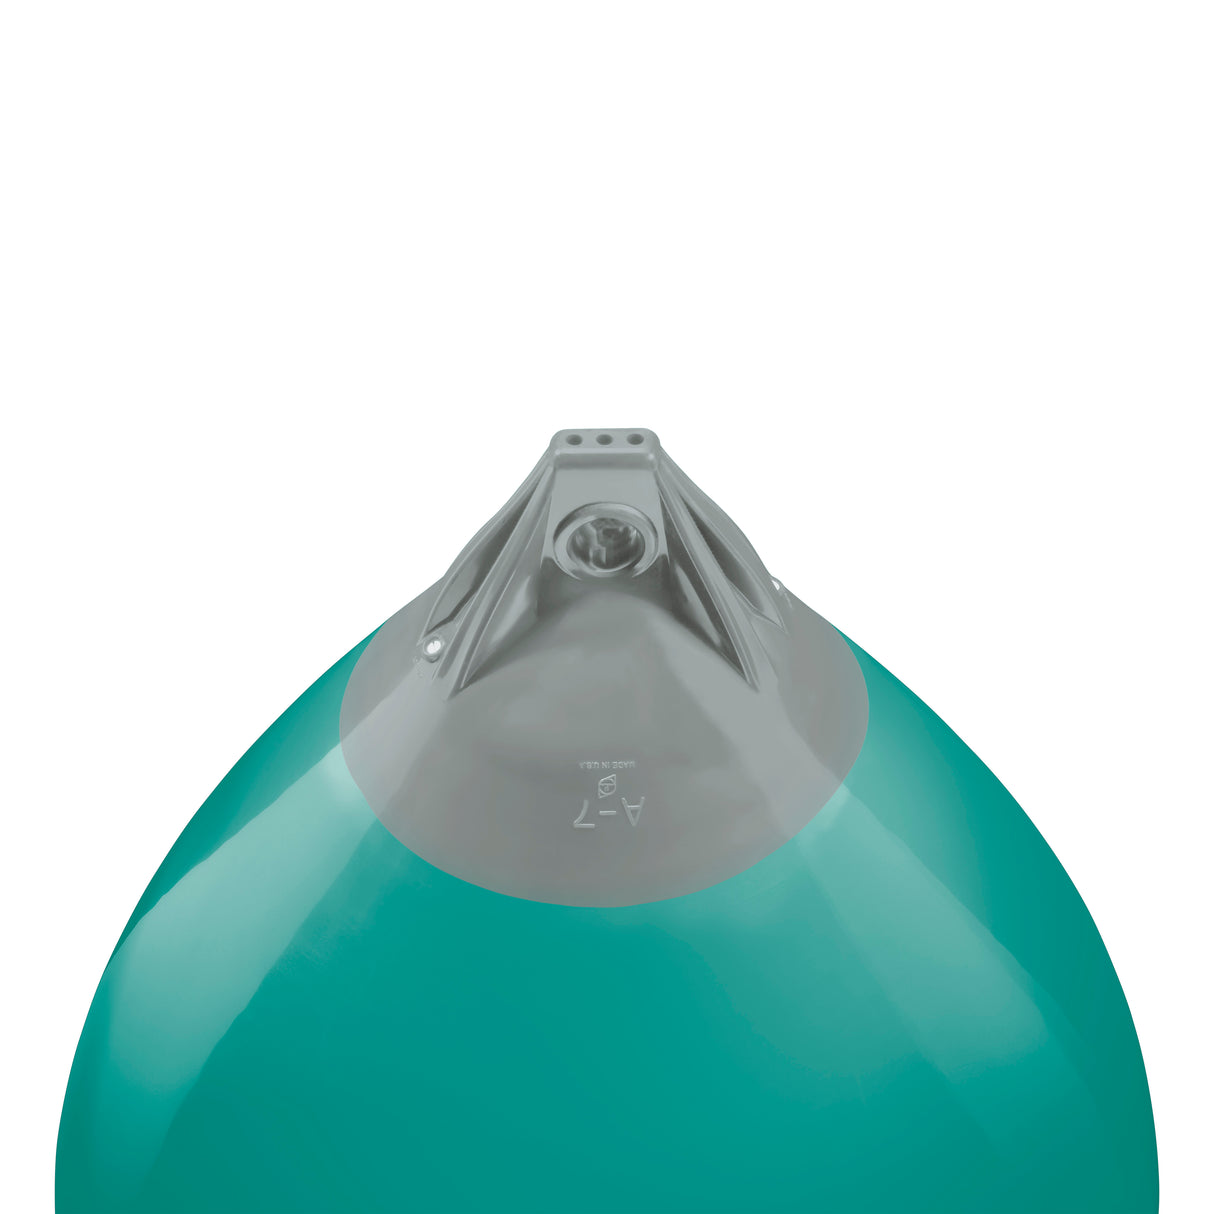 Teal buoy with Grey-Top, Polyform A-7 angled shot